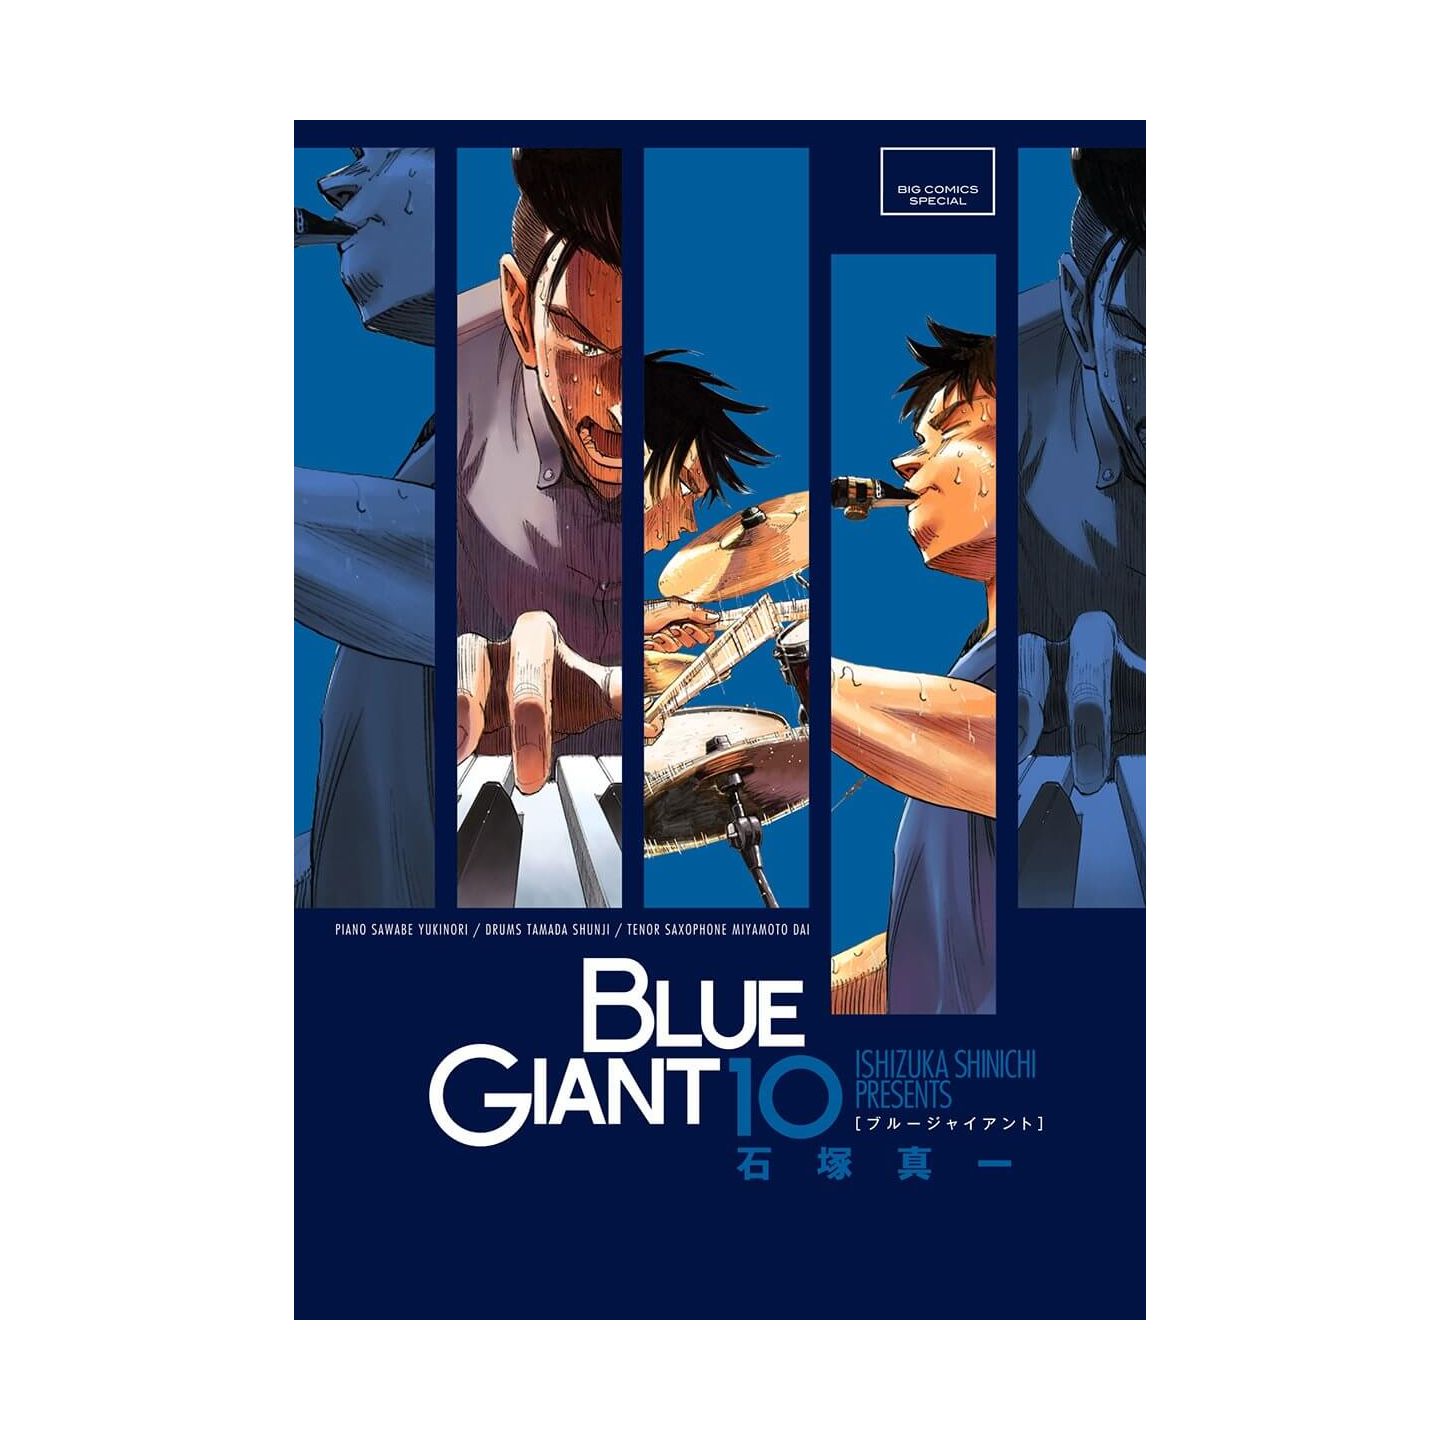 Blue Giant Anime Brings Tears of Admiration to Its Main VA